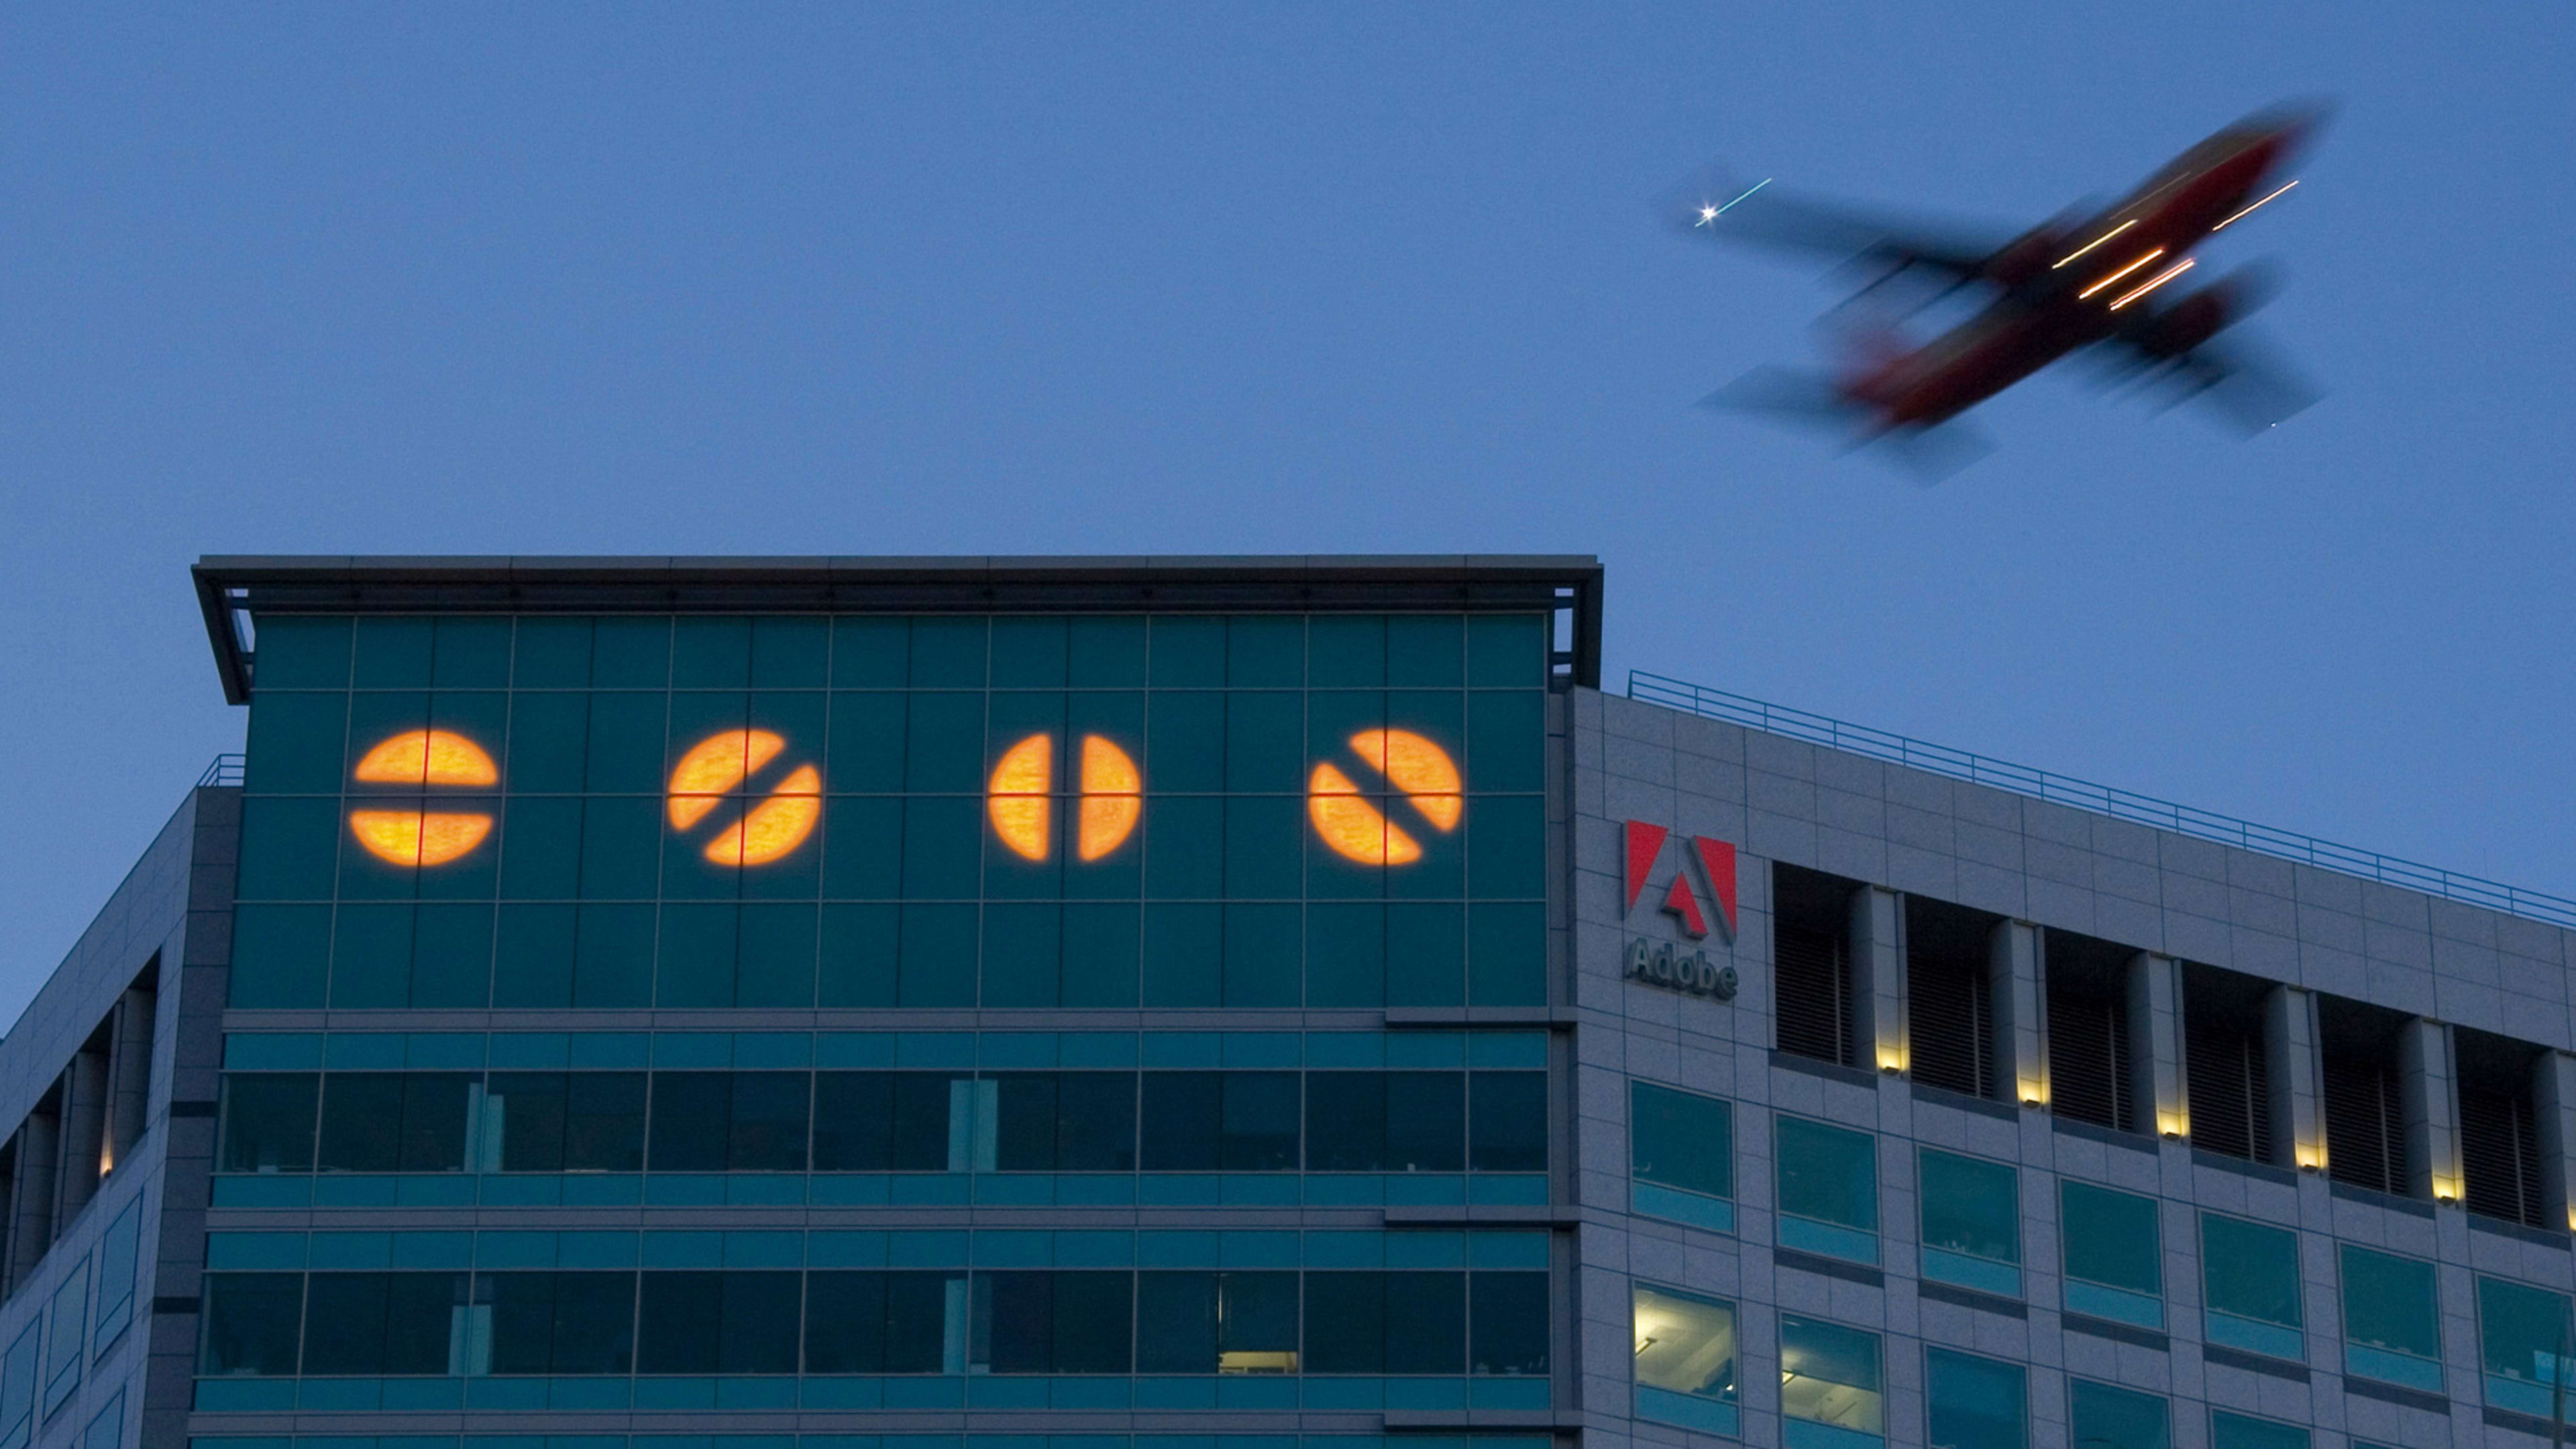 There’s a giant riddle on Adobe’s office tower, and people are racing to solve it